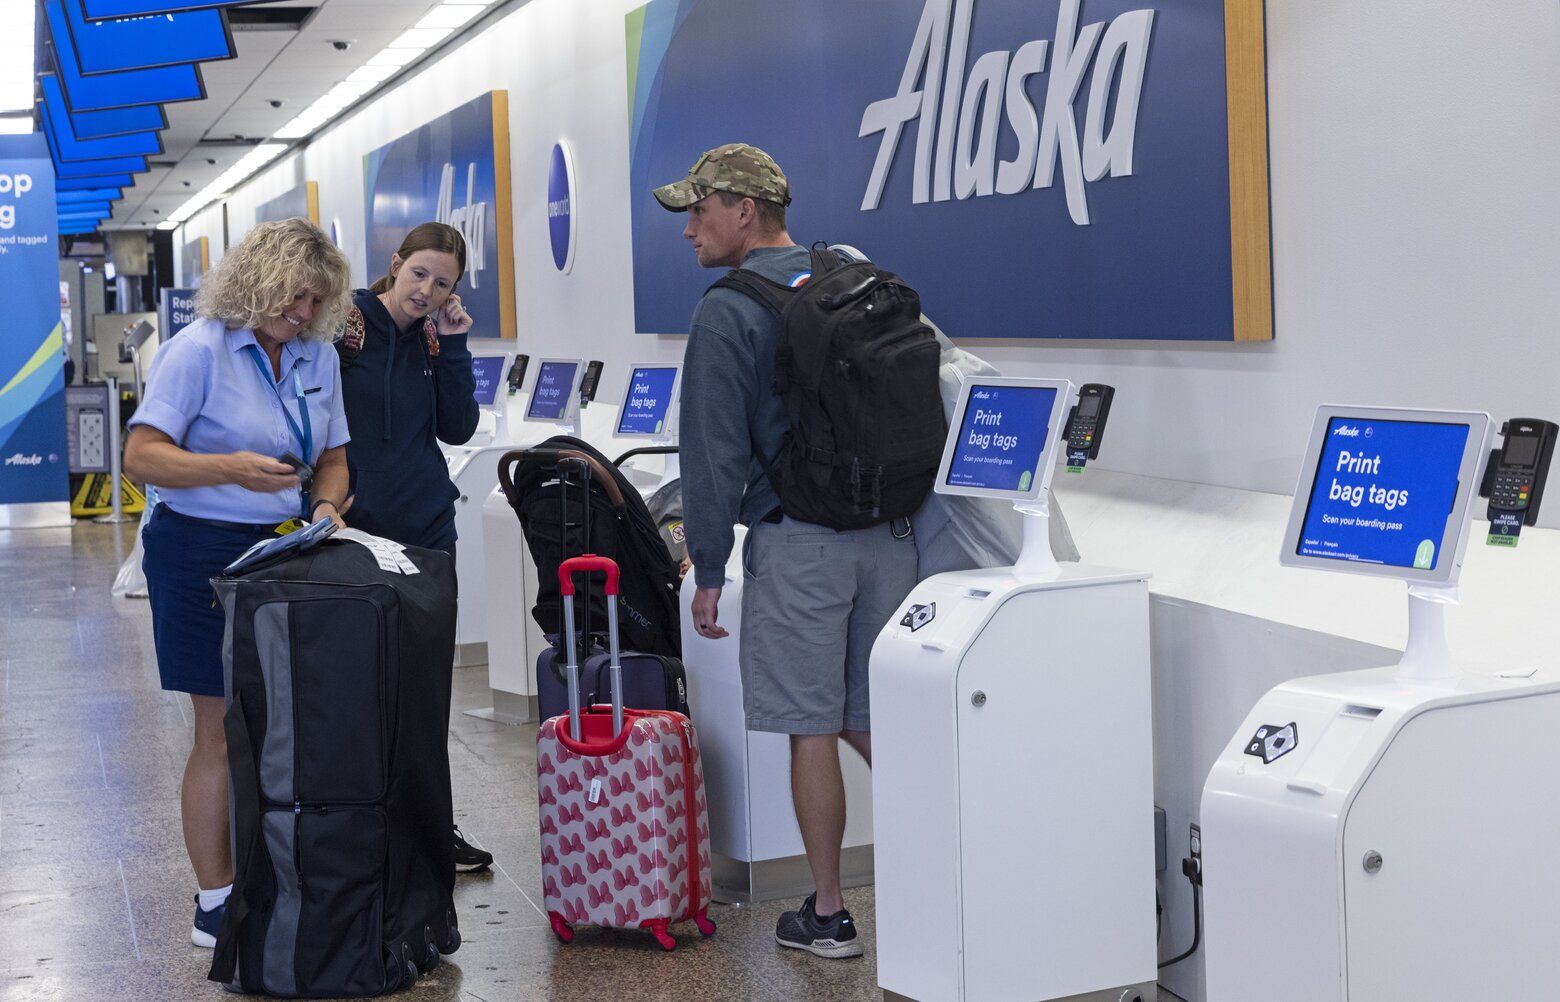 Alaska Airlines Check-in & Baggage | BudgetAir.com